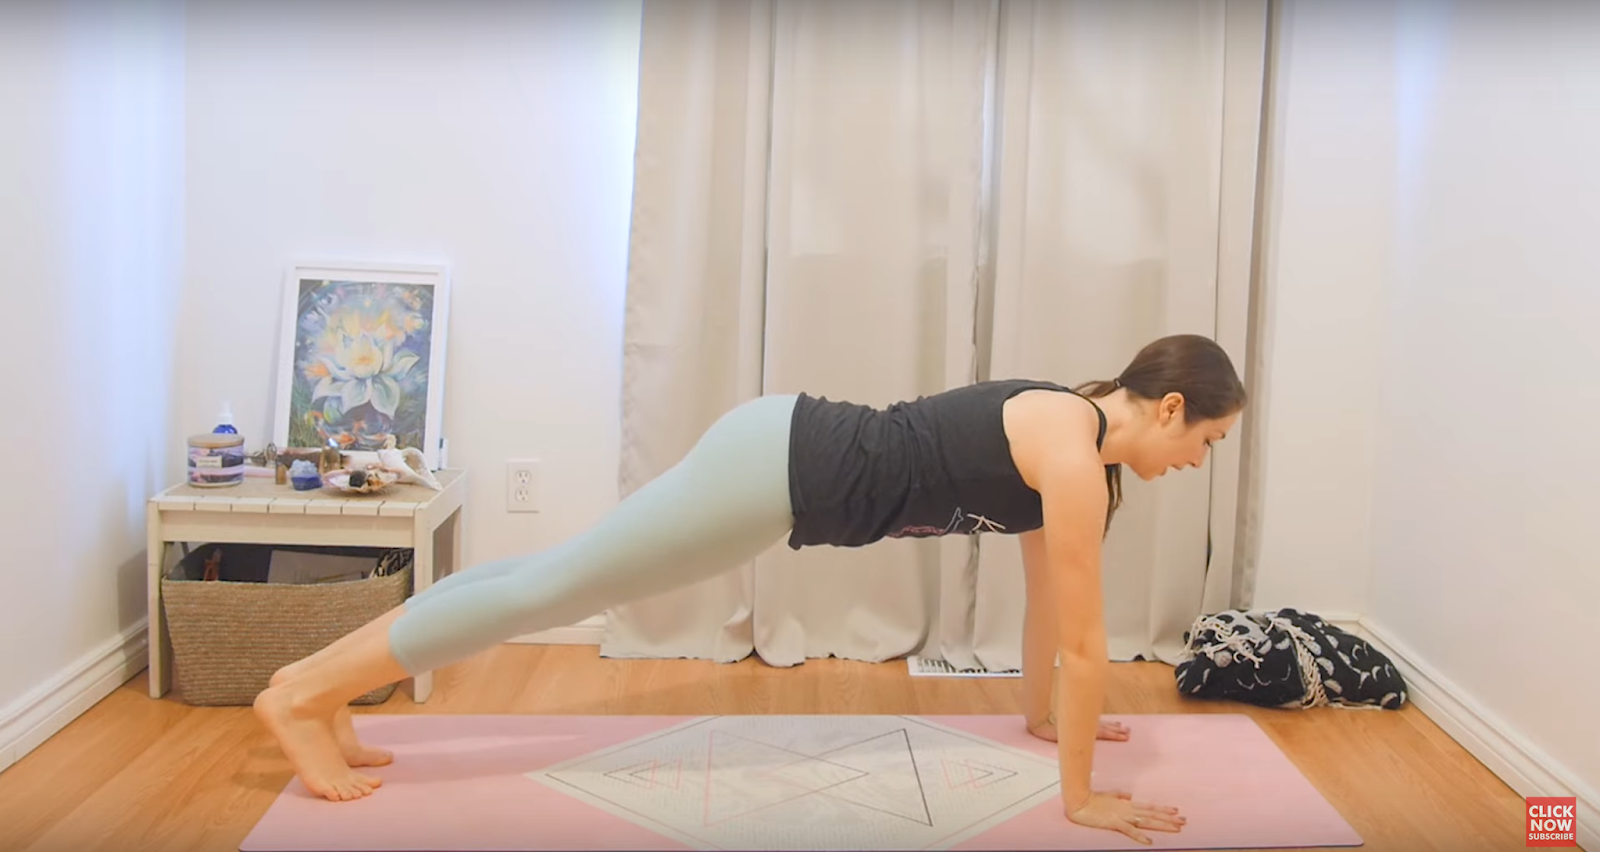 10 yoga poses to reduce belly fat during winter season | HealthShots